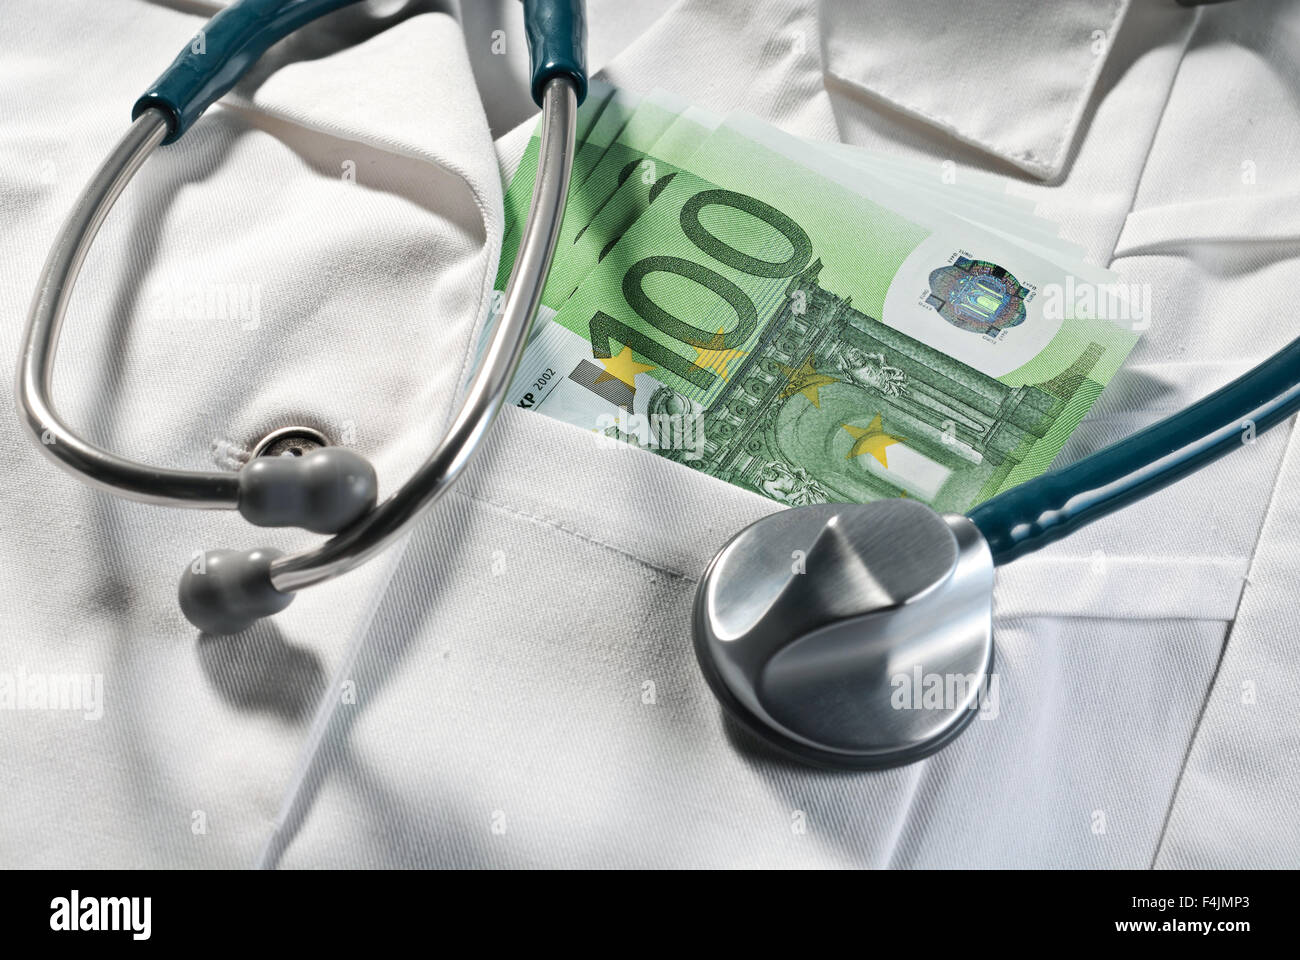 Stethoscope and money bills on a doctor's coat Stock Photo